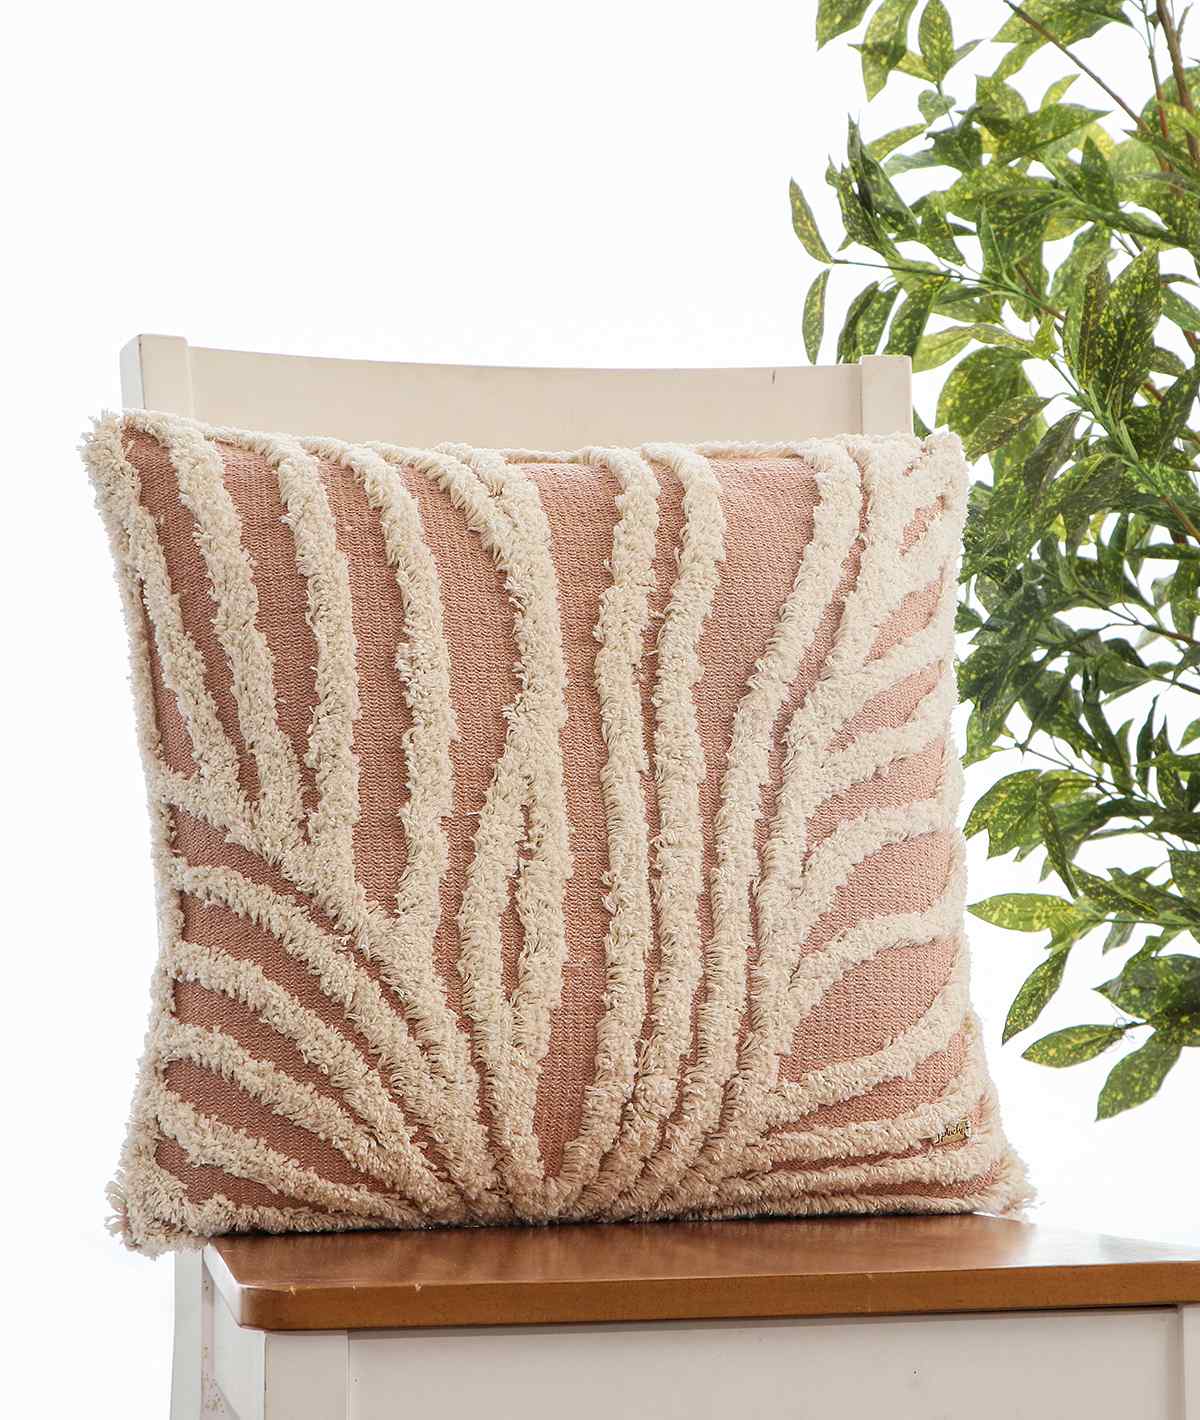 Sea Grass  Cotton Knitted Decorative Tufted Cushion Cover (Blush Pink & Natural)